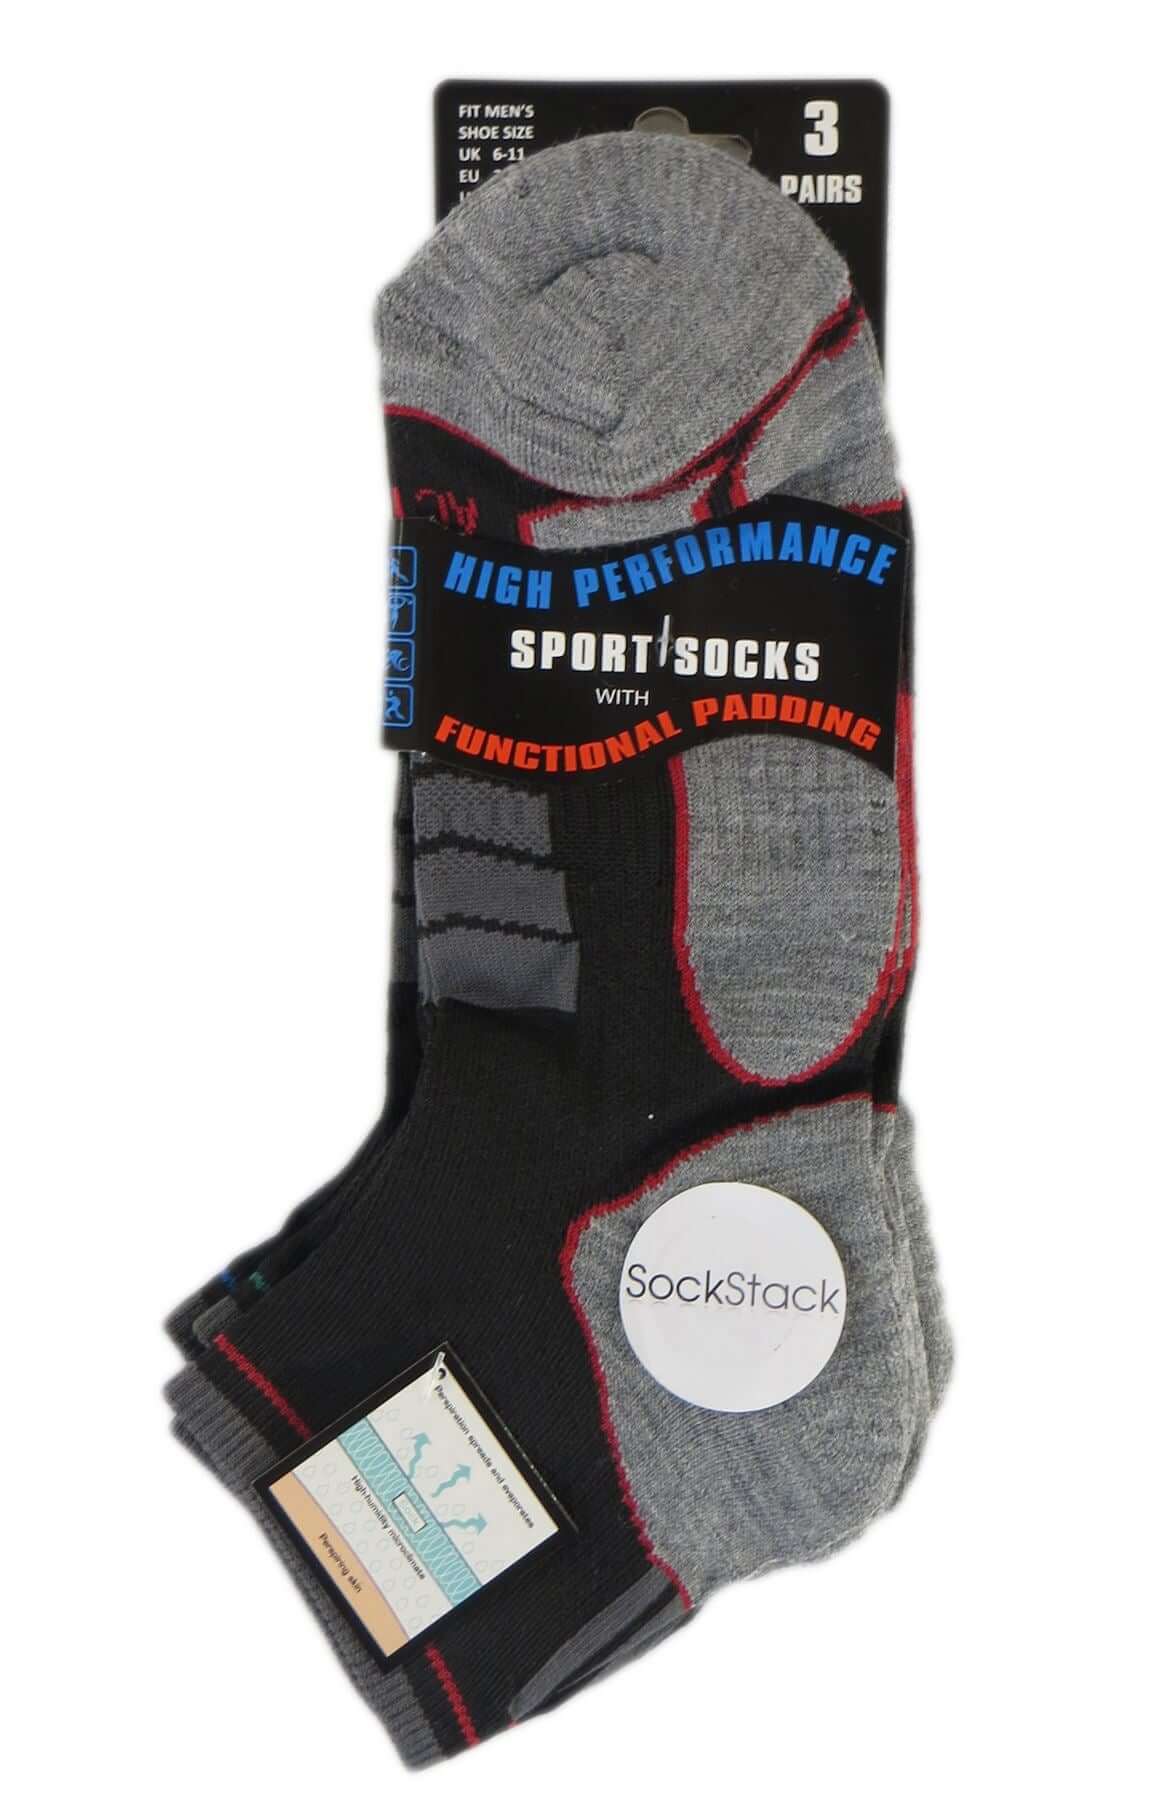 6 Pairs Of Men's Sport Socks, Active Trainer Socks For Cycling Gym Sports. Buy now for £5.00. A Socks by Sock Stack. 6-11, acrylic, assorted, athletics, black, blue, boot, boys socks, comfortable, cycling, elastane, green, grey, gym, low cut, mens, multi